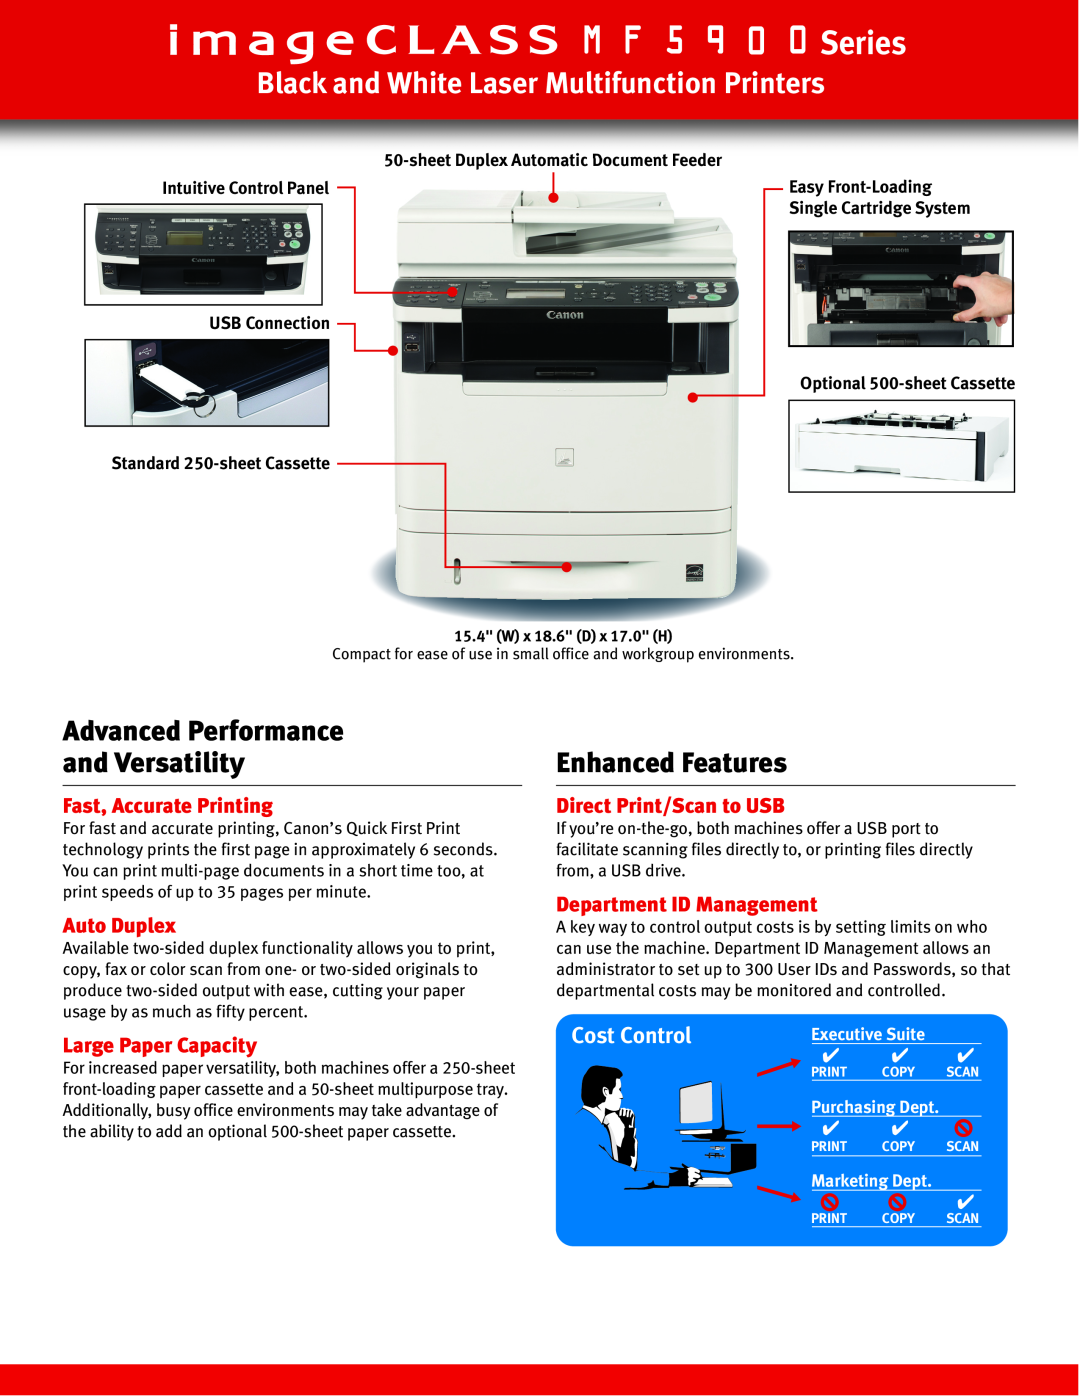 Canon MF5960DN Series, Black and White Laser Multifunction Printers, Advanced Performance and Versatility, Auto Duplex 